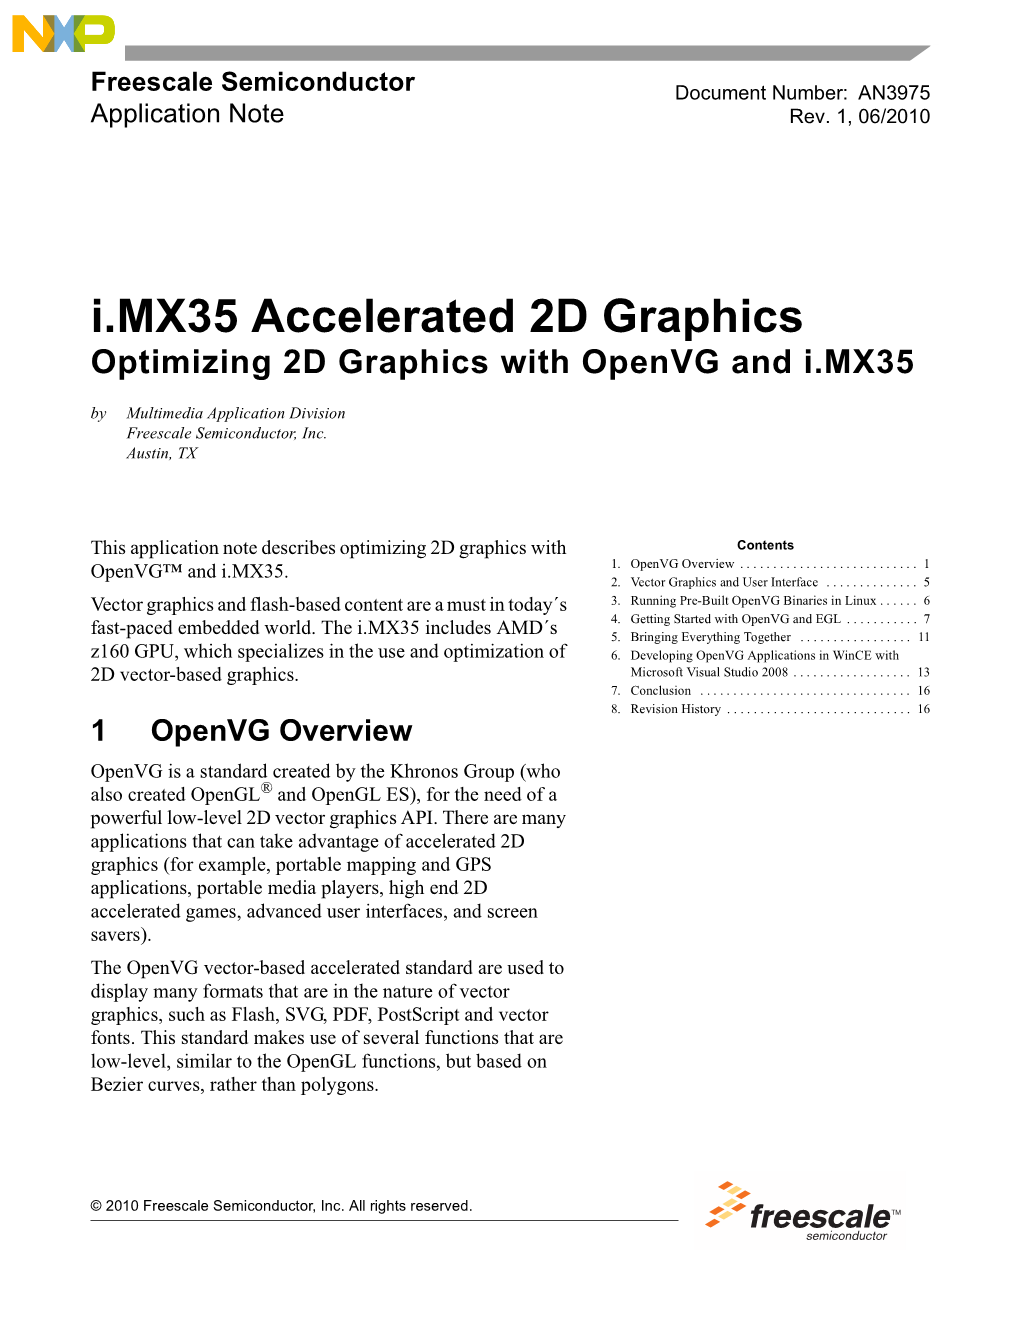 I.MX35 Accelerated 2D Graphics Optimizing 2D Graphics with Openvg and I.MX35 by Multimedia Application Division Freescale Semiconductor, Inc